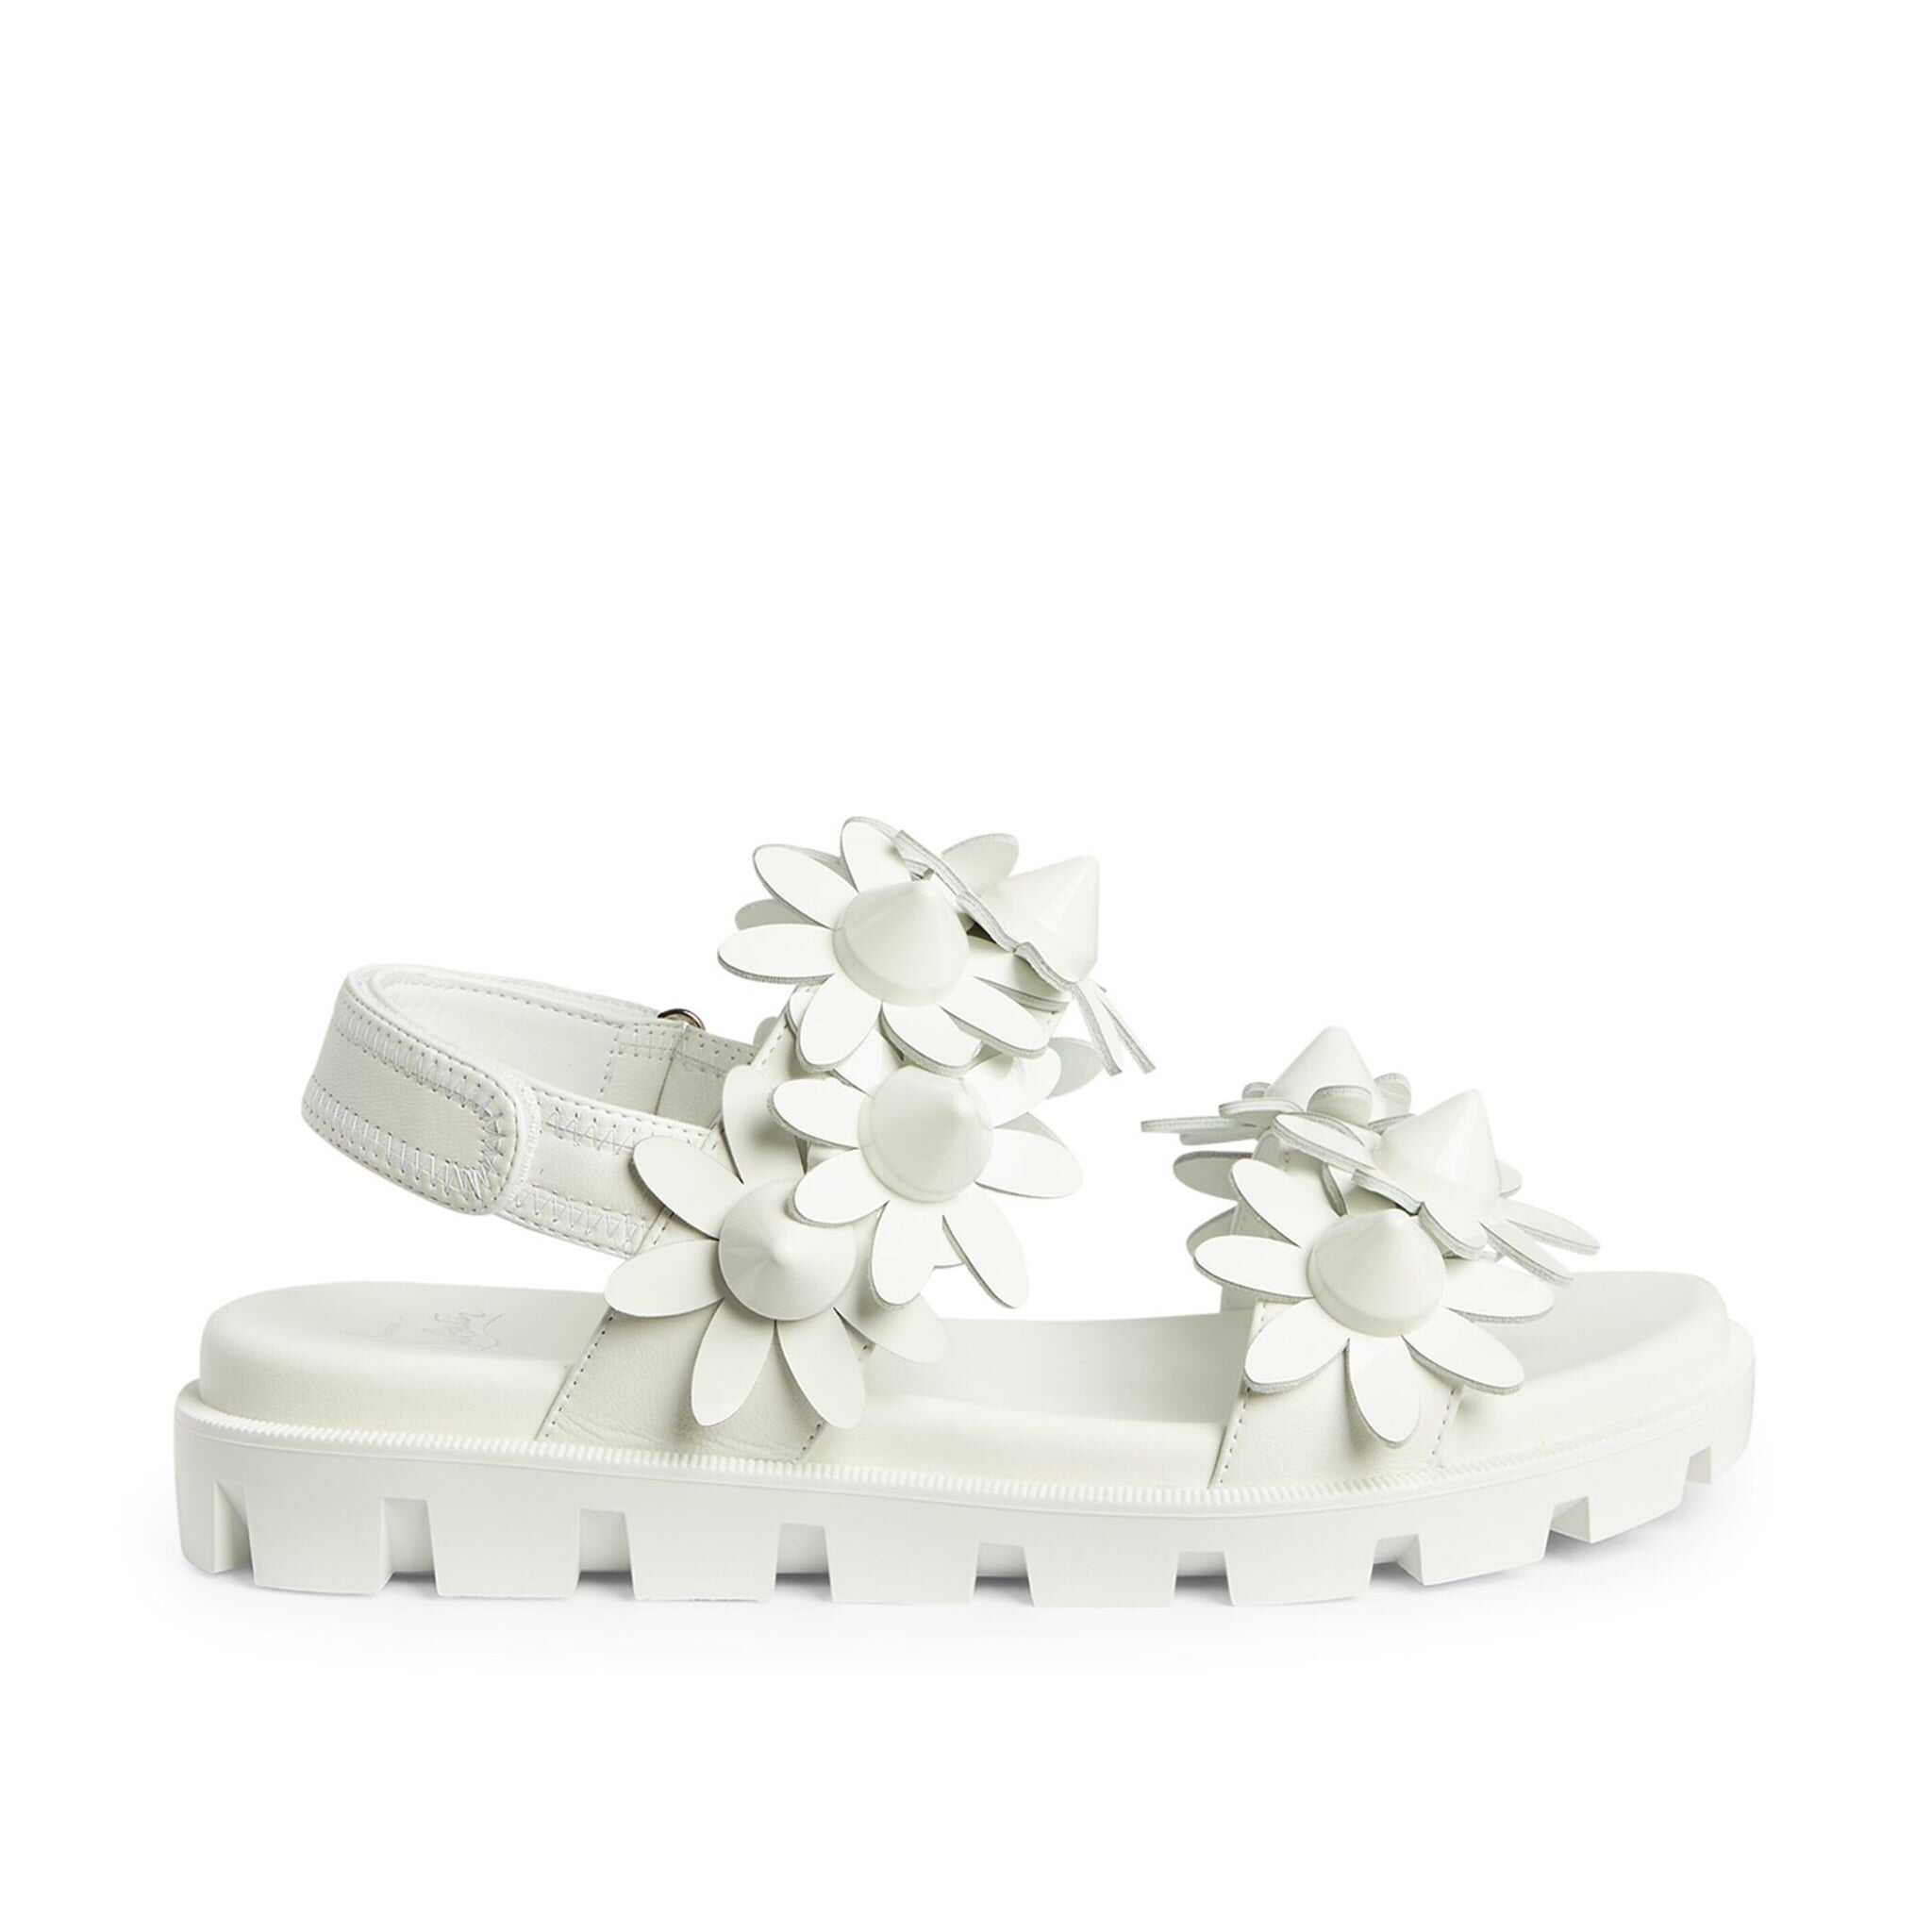 Christian Louboutin Daisy Spikes Cool Sandals White